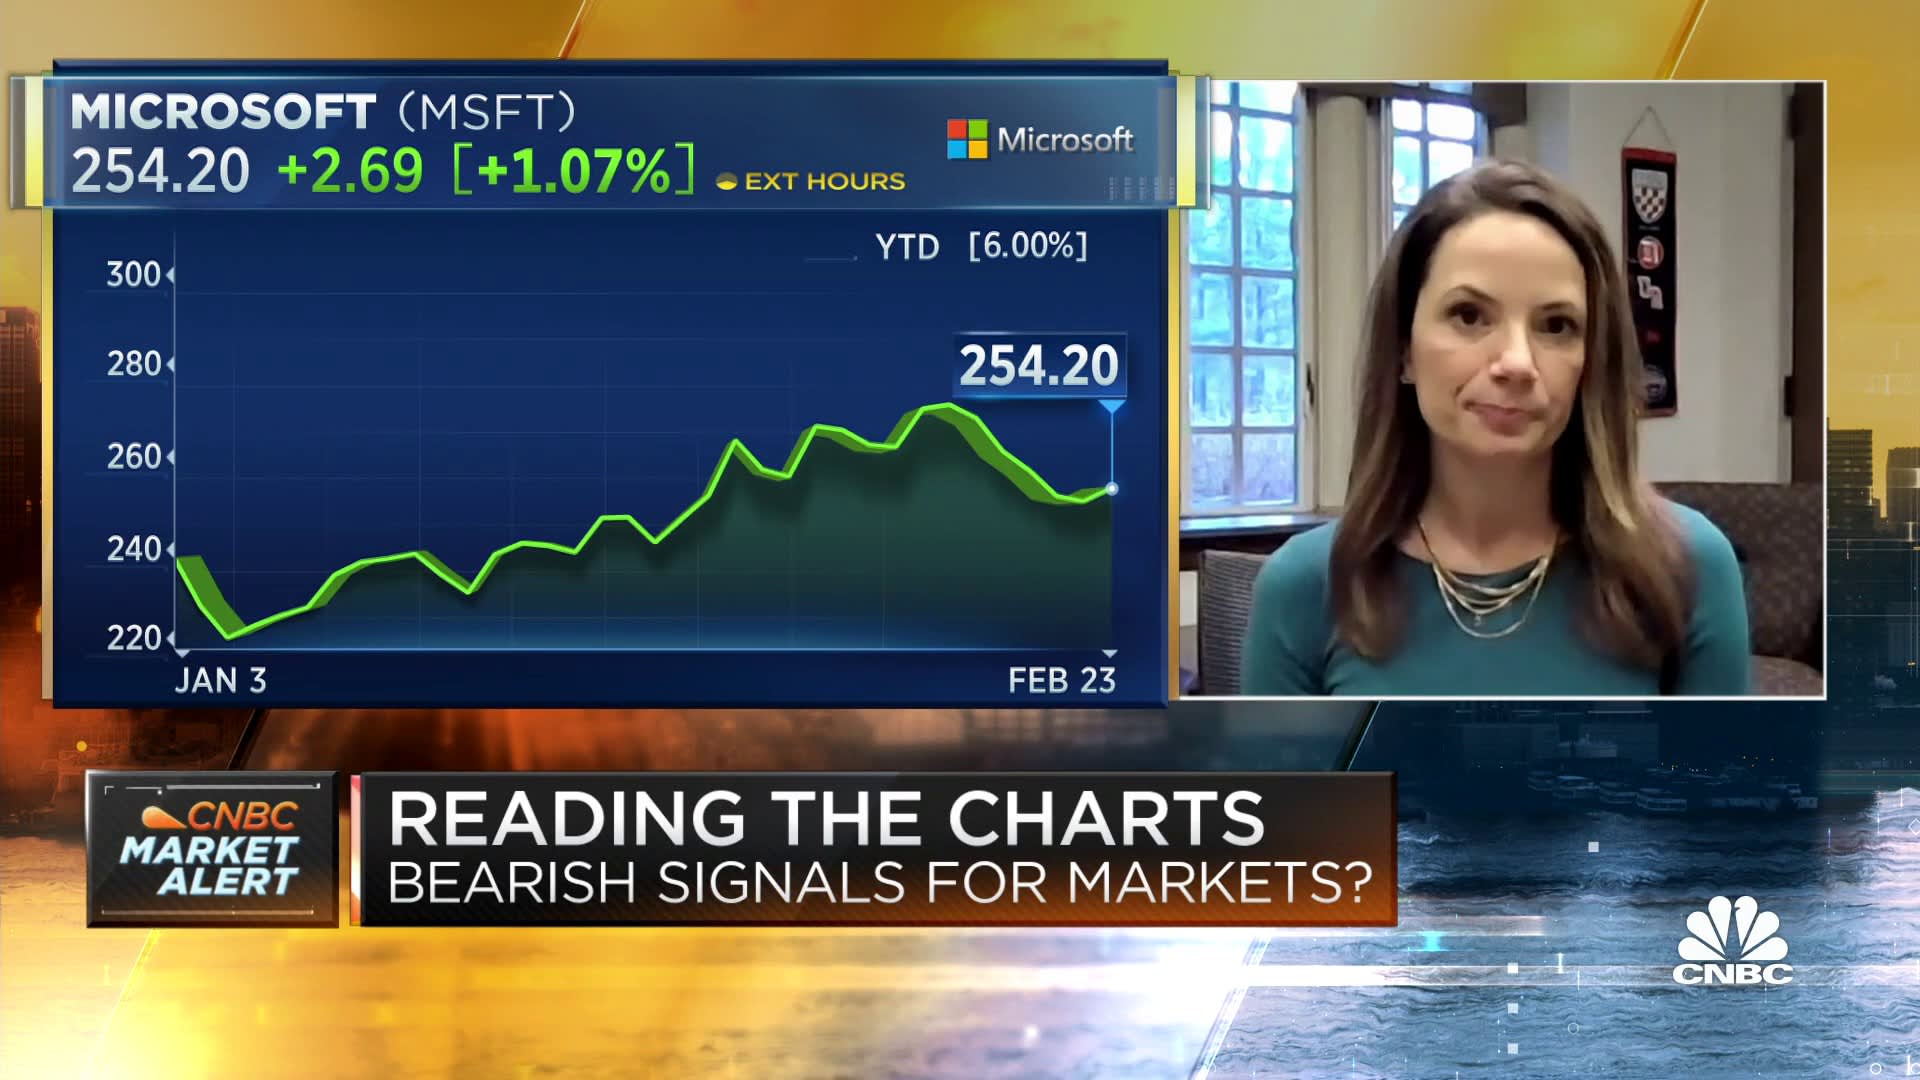 Stock market reversal shows shift in sentiment that will be difficult to weather, says Katie Stockton